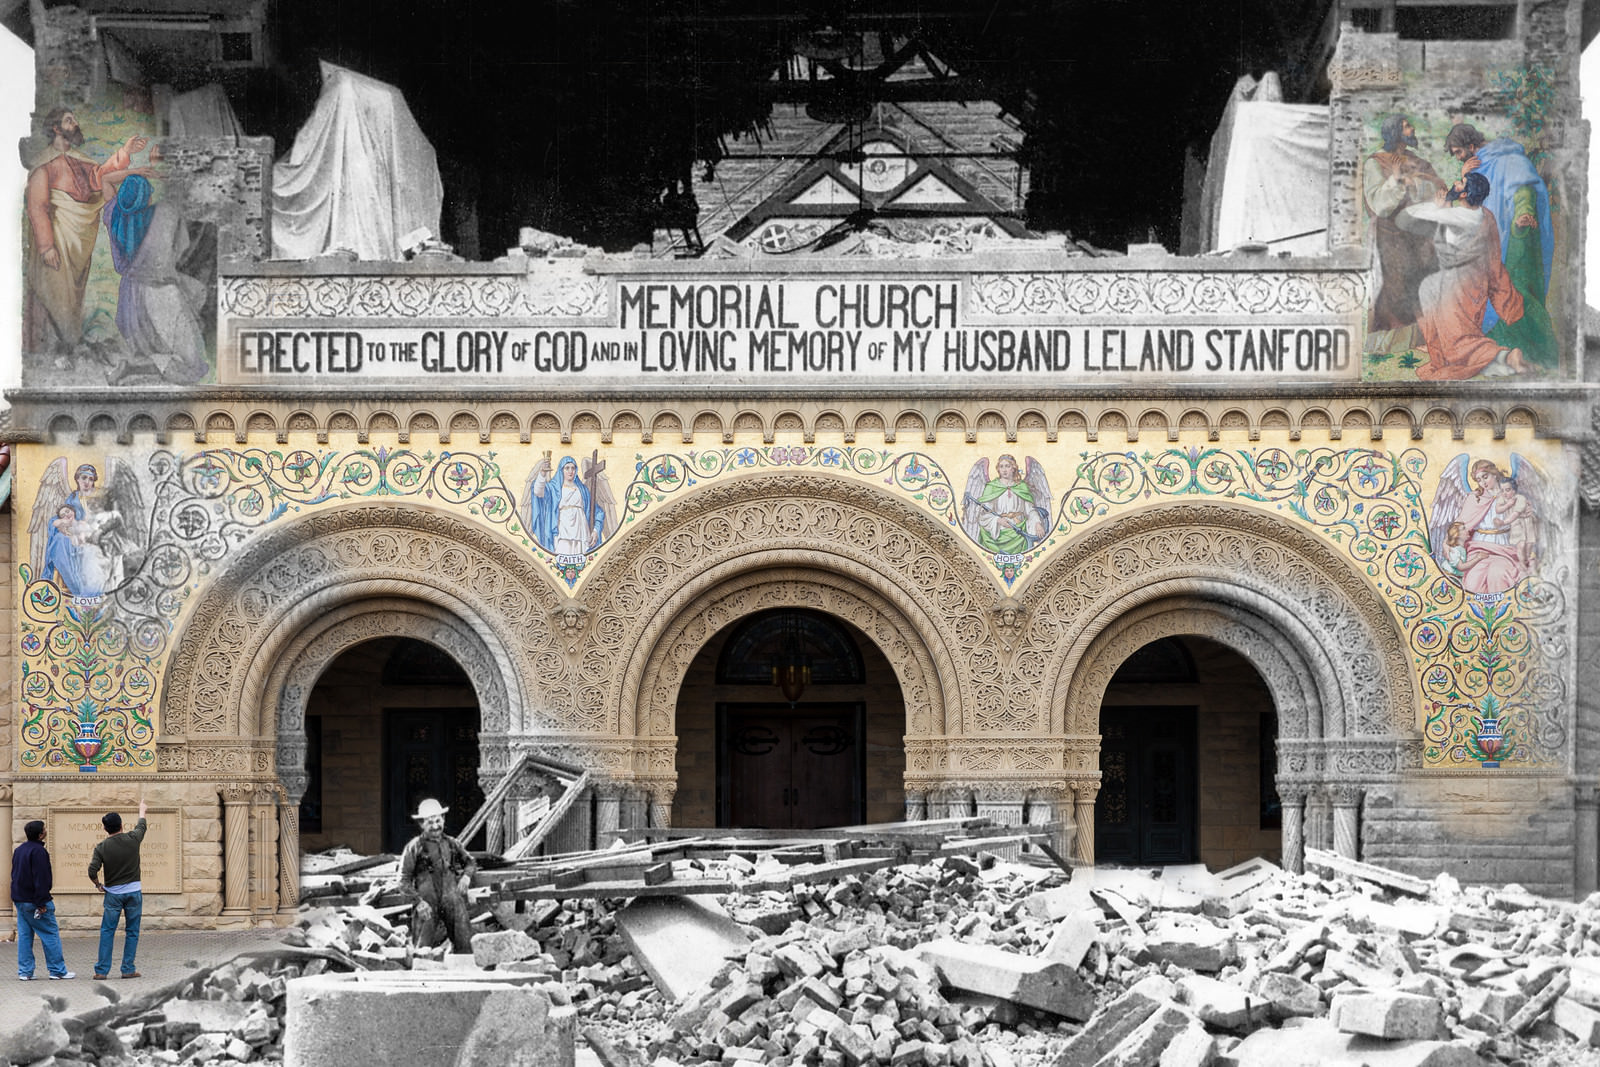 The Stanford Memorial Church was wrecked with a fallen spire, cracked walls, and destroyed mosaics.